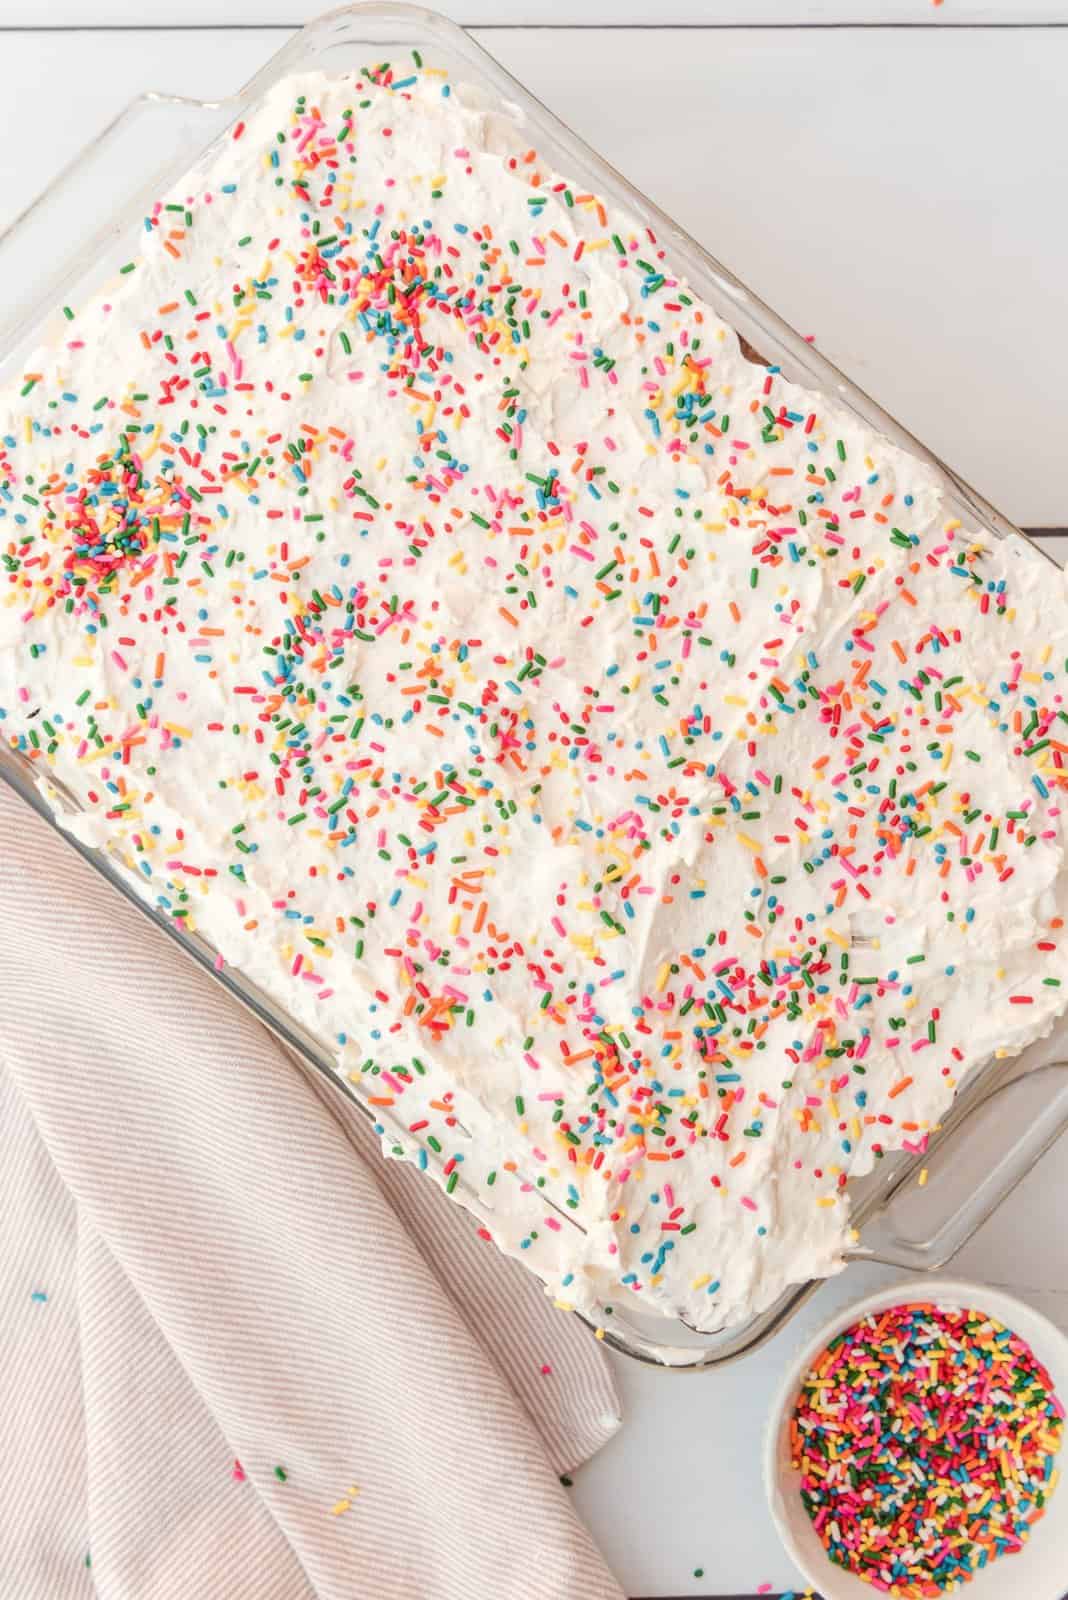 Finished cake with sprinkles added to the top.